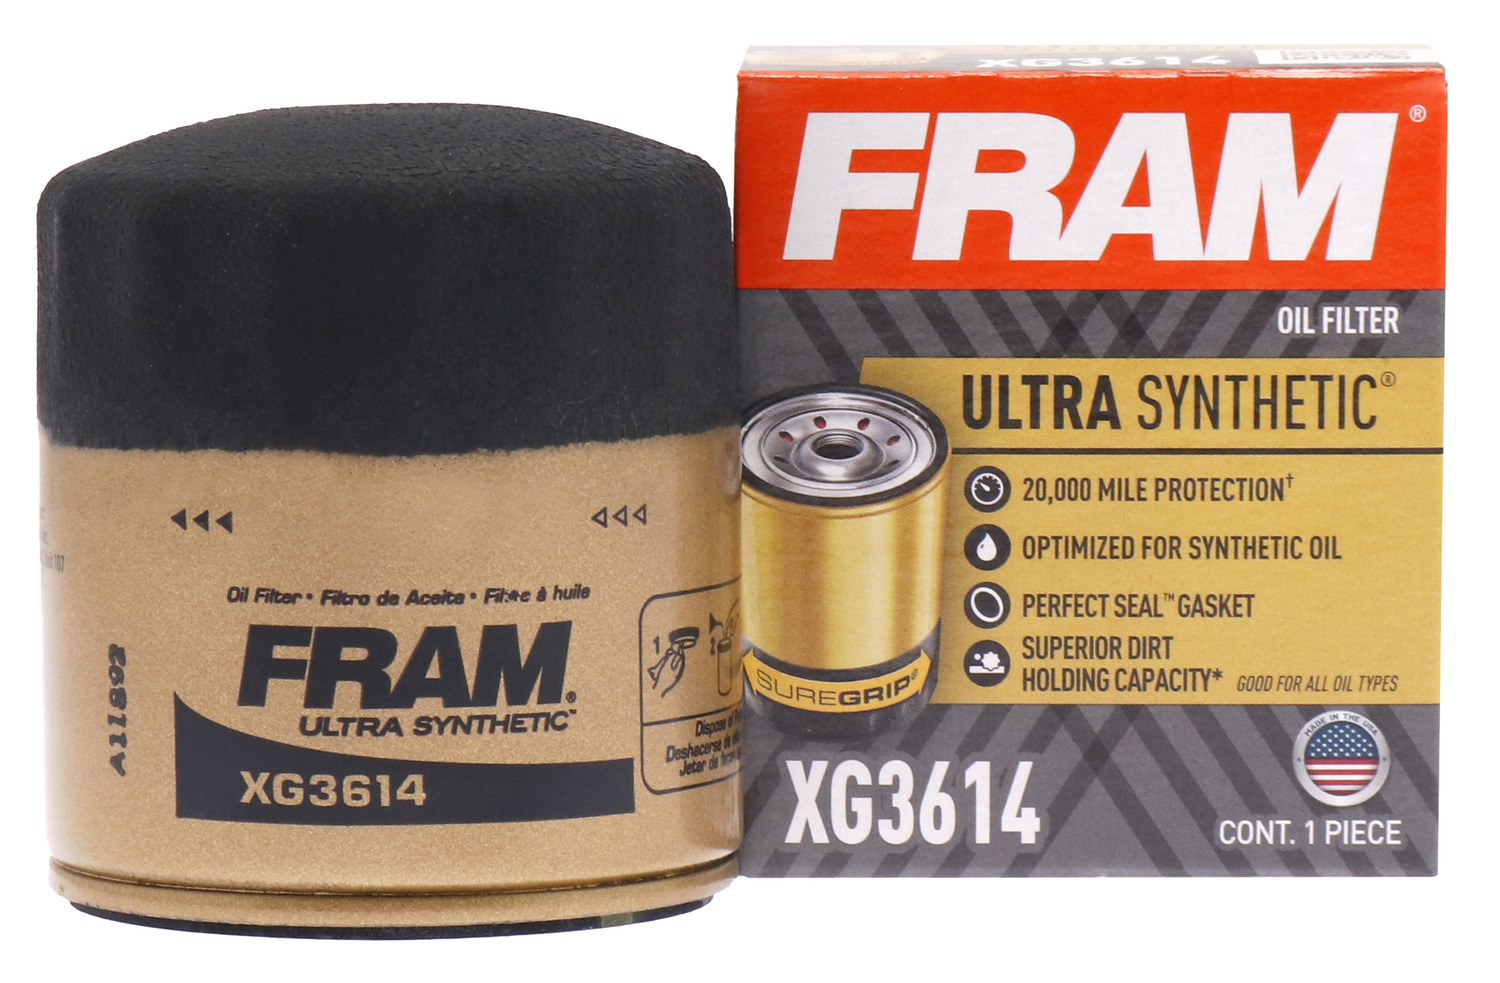 FRAM Ultra Synthetic Oil Filter, XG3614, 20K mile Replacement Engine Oil Filter for Select Ford Vehicles - image 1 of 10